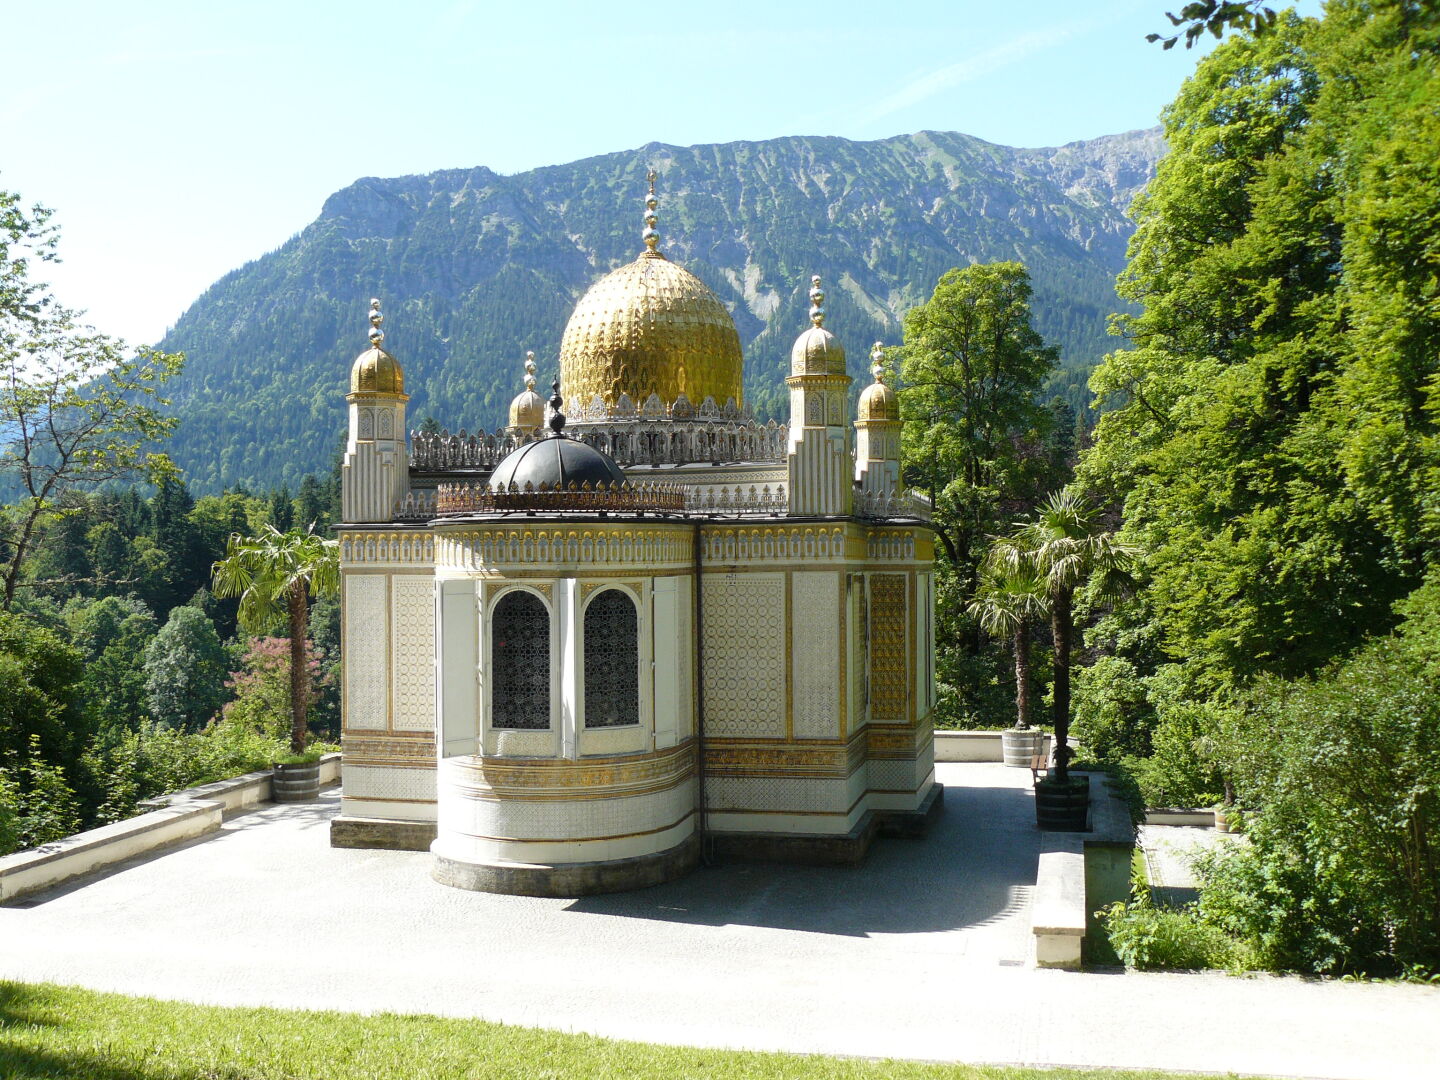 The Morroccan Kiosk in Castle Linderhof park, from the outside...